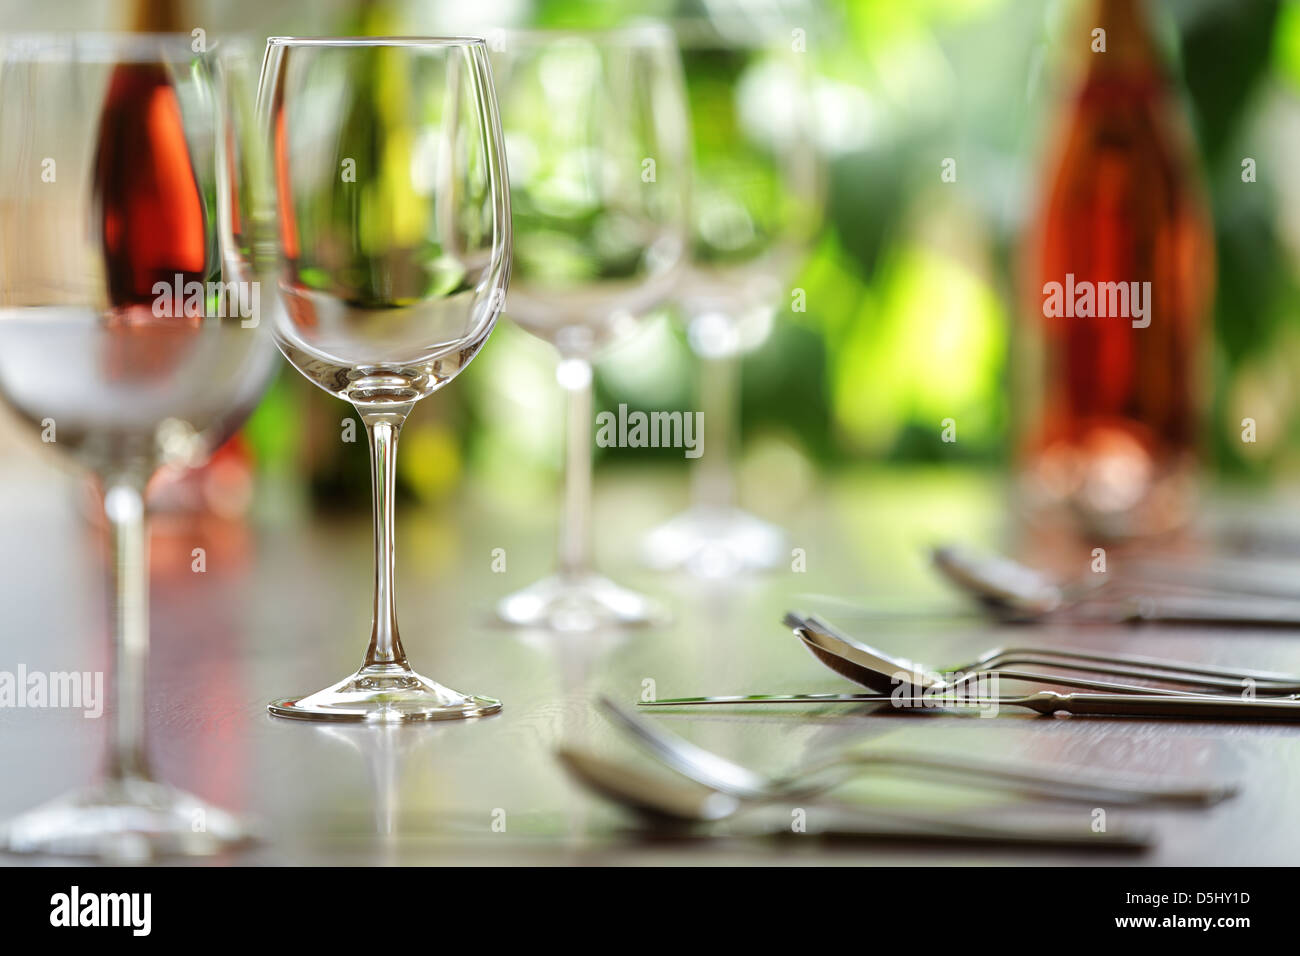 Wine glass and place settings Stock Photo